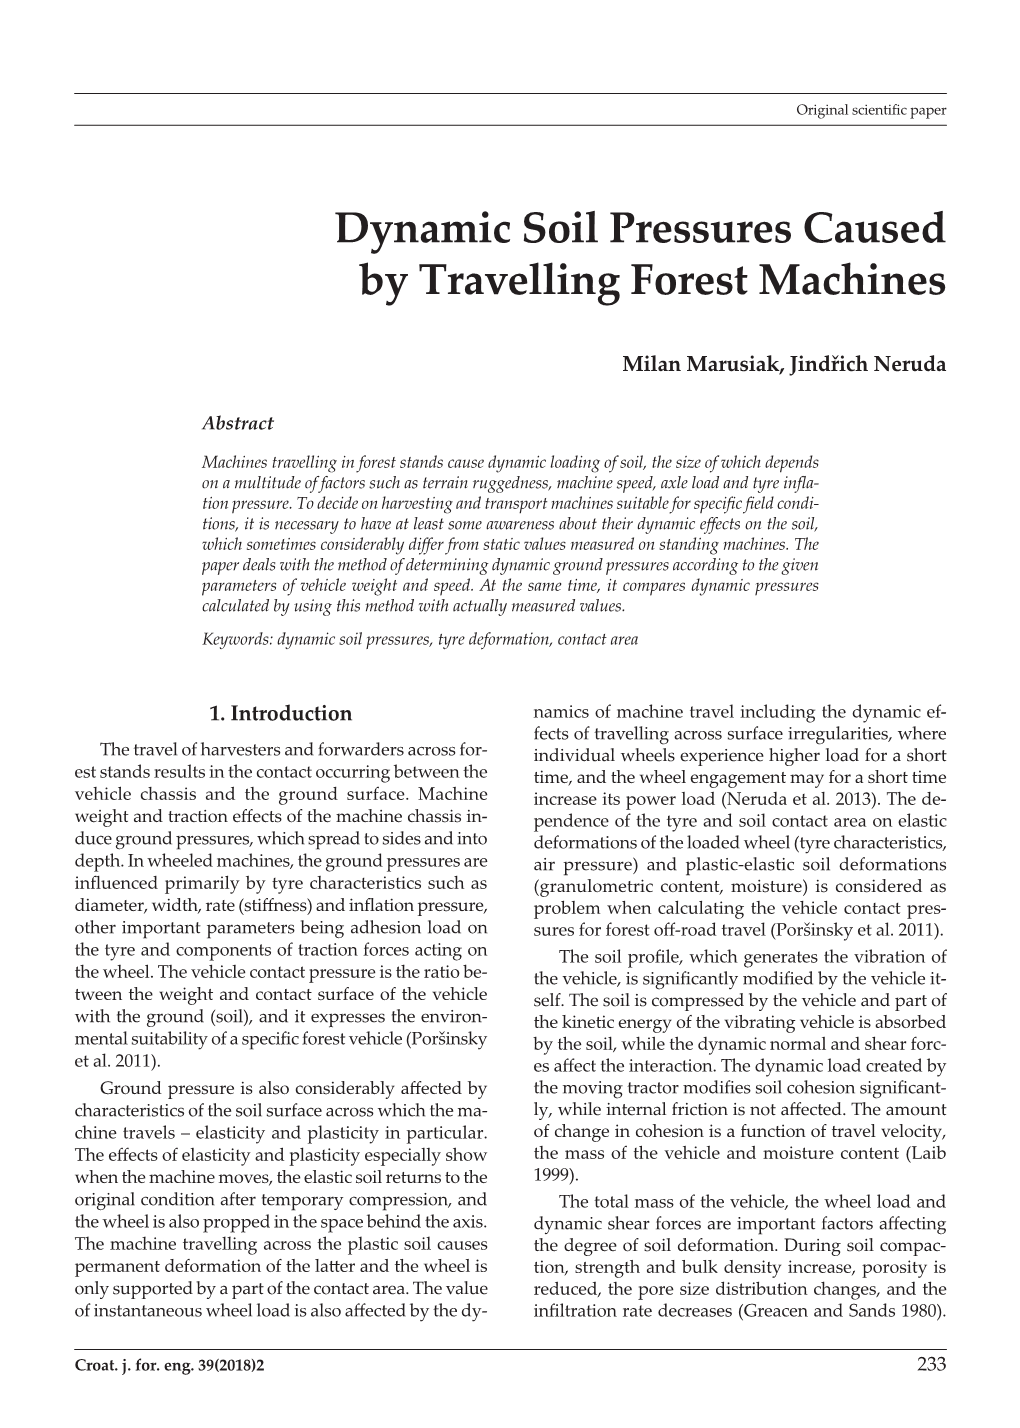 Dynamic Soil Pressures Caused by Travelling Forest Machines